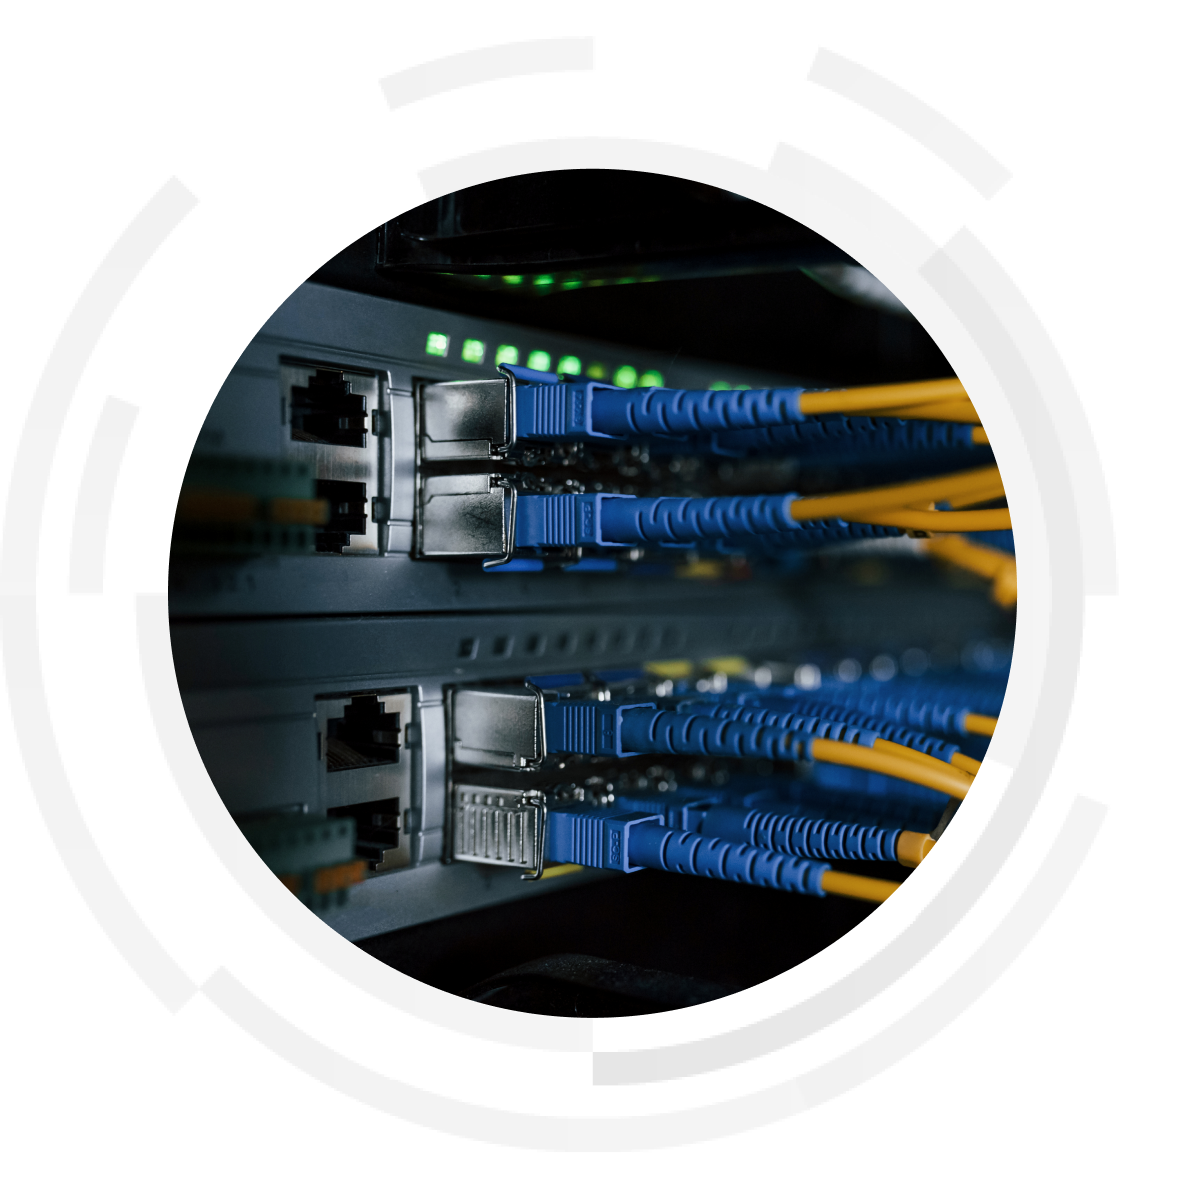 Server cables in a data centre